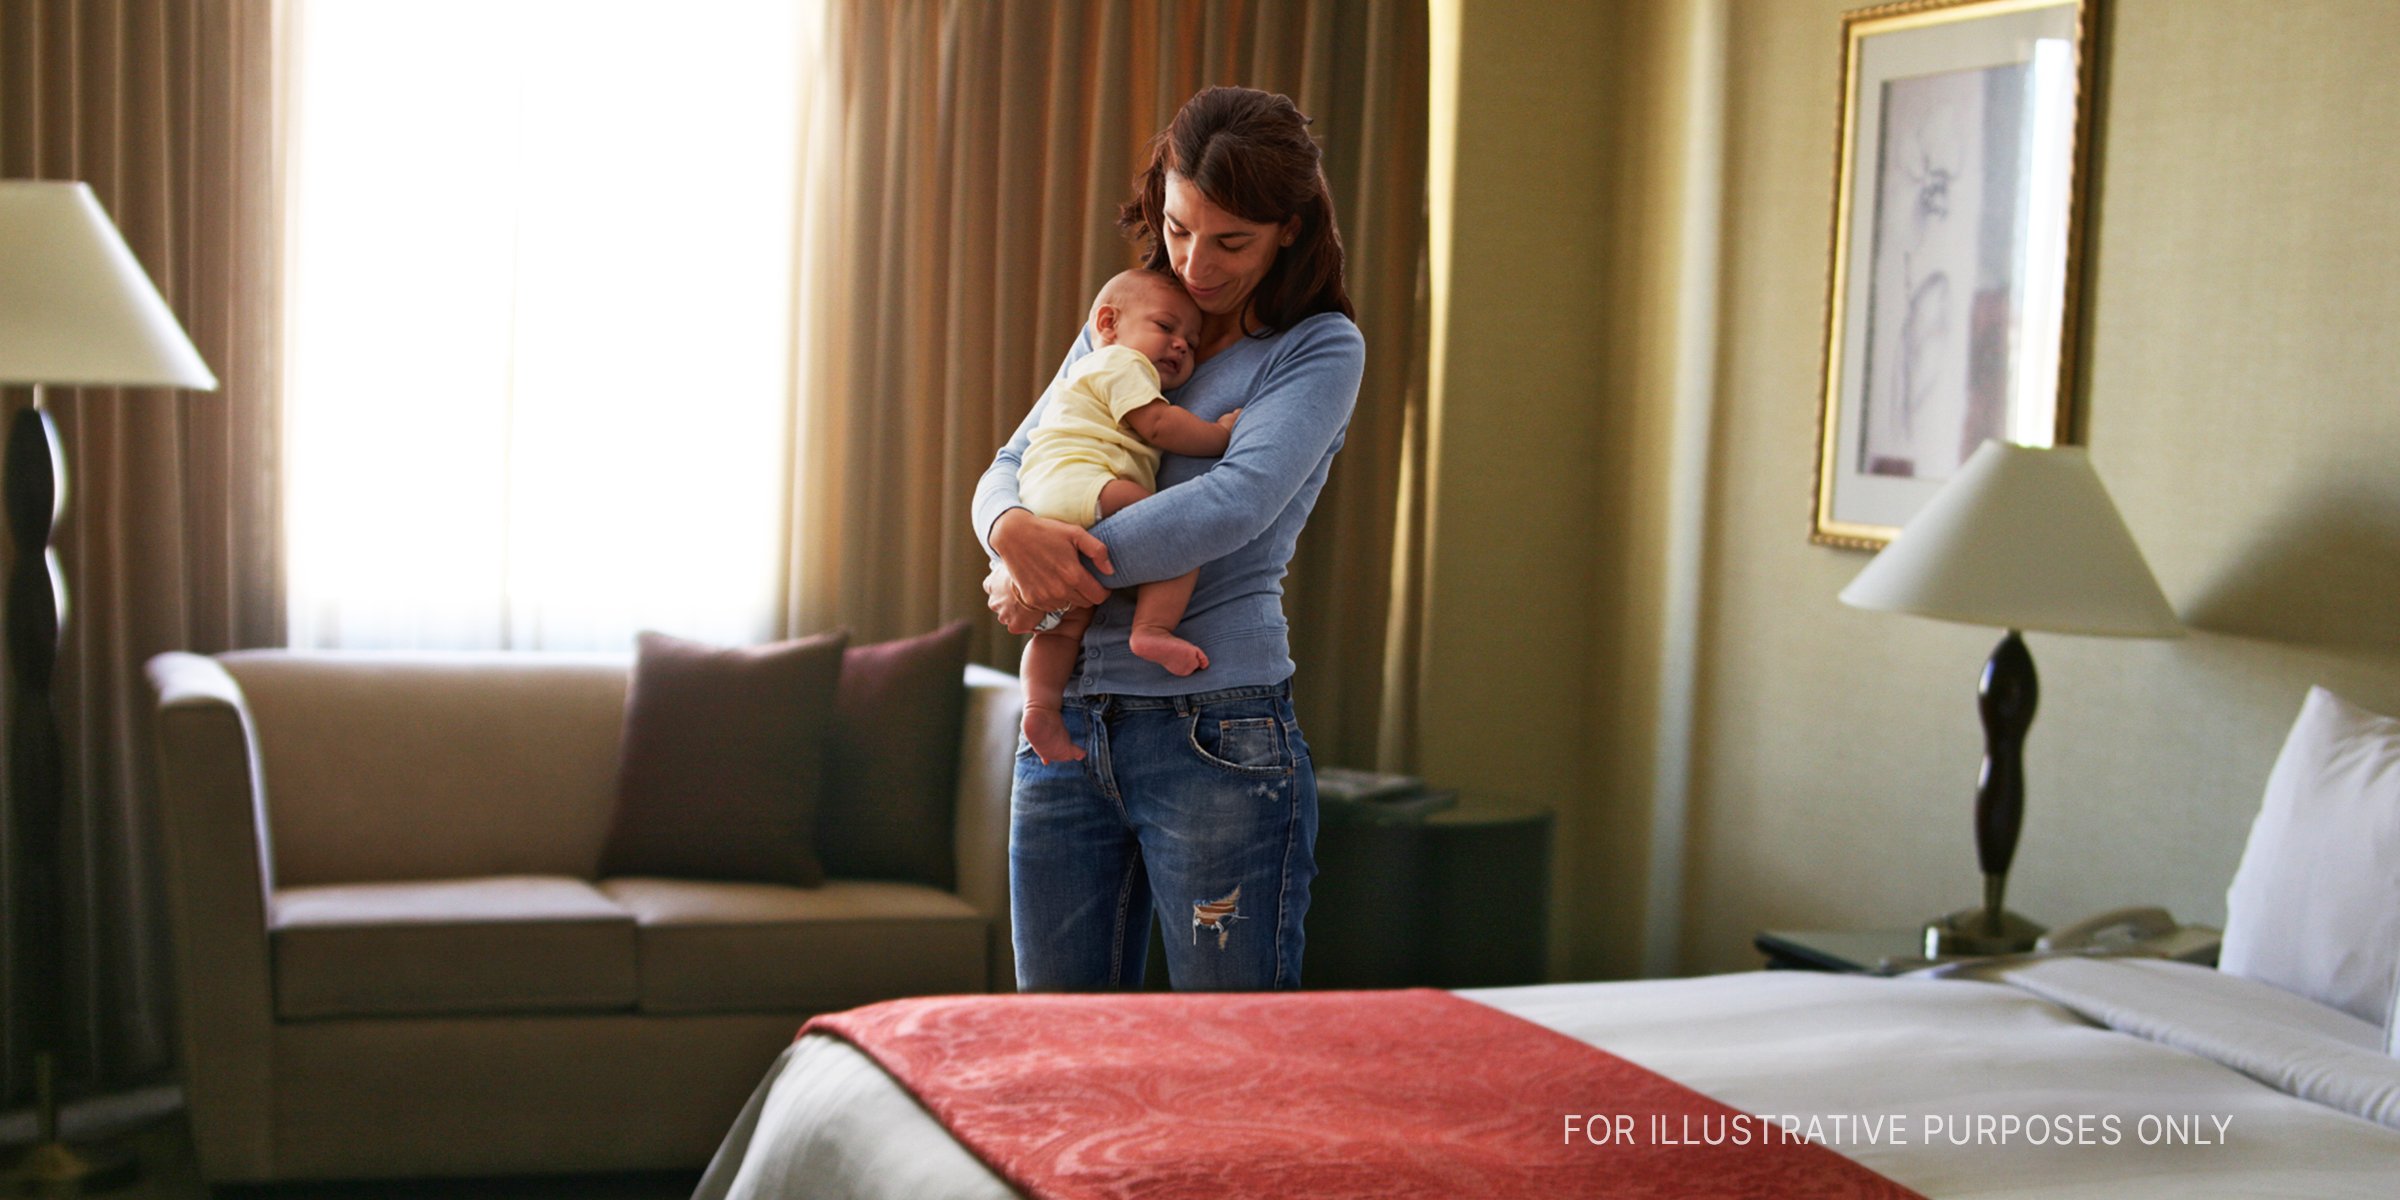 Woman in a bedroom holding a baby. | Source: Flickr / quinn.anya (CC BY-SA 2.0) Shutterstock